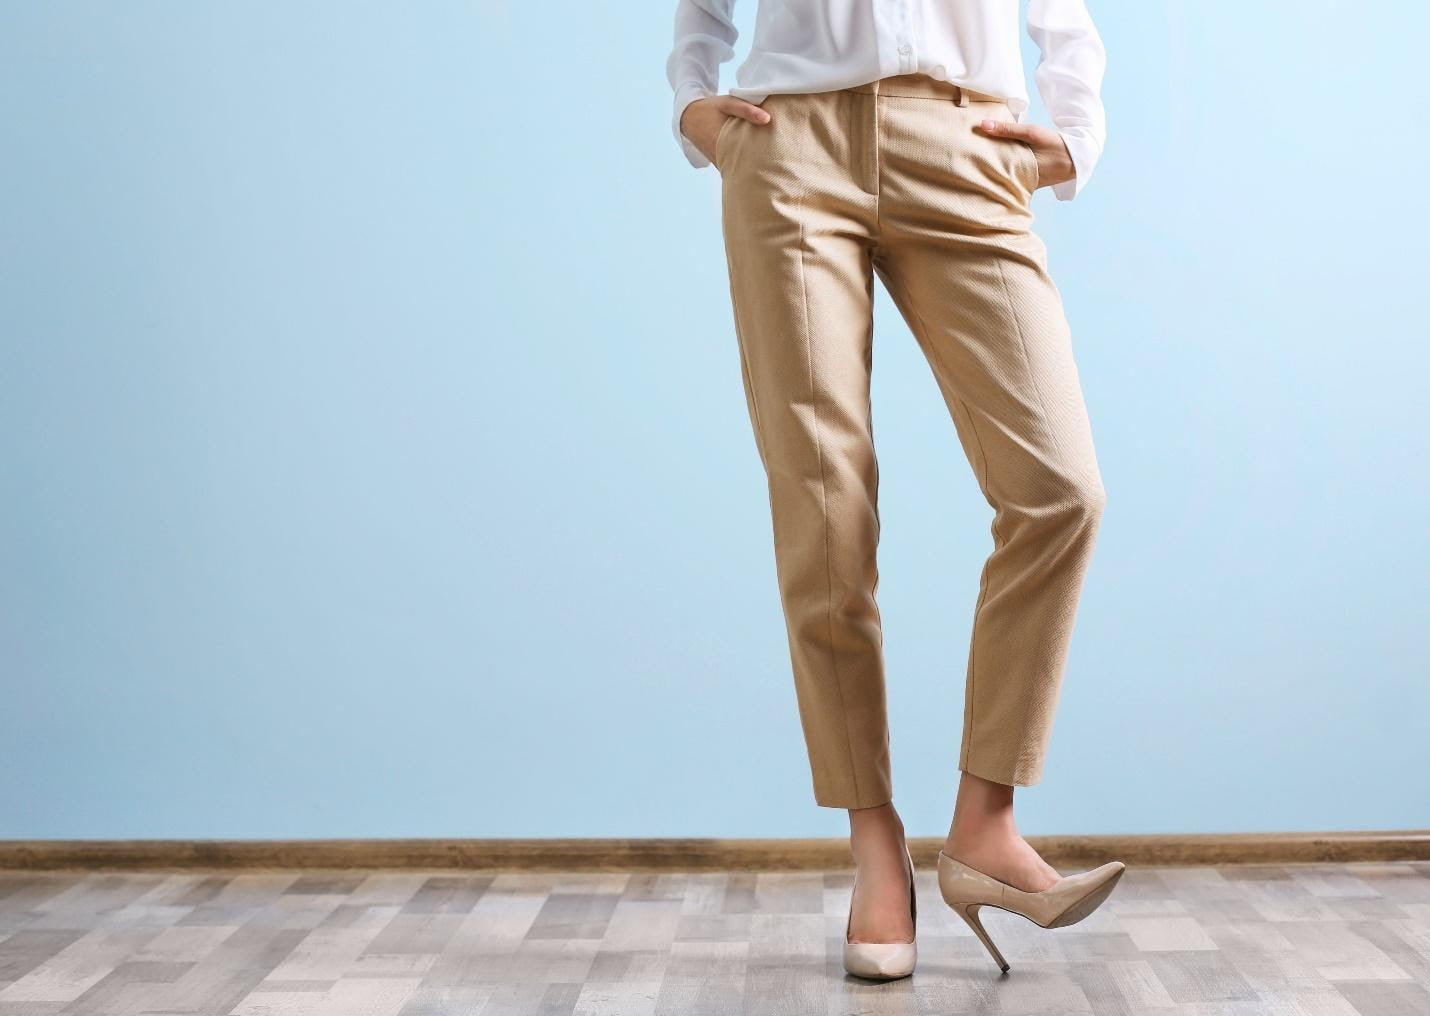 6 tips to style formal pants for women – 6 Tricks to Fashion Formal Pants for Ladies – The Digital Boy